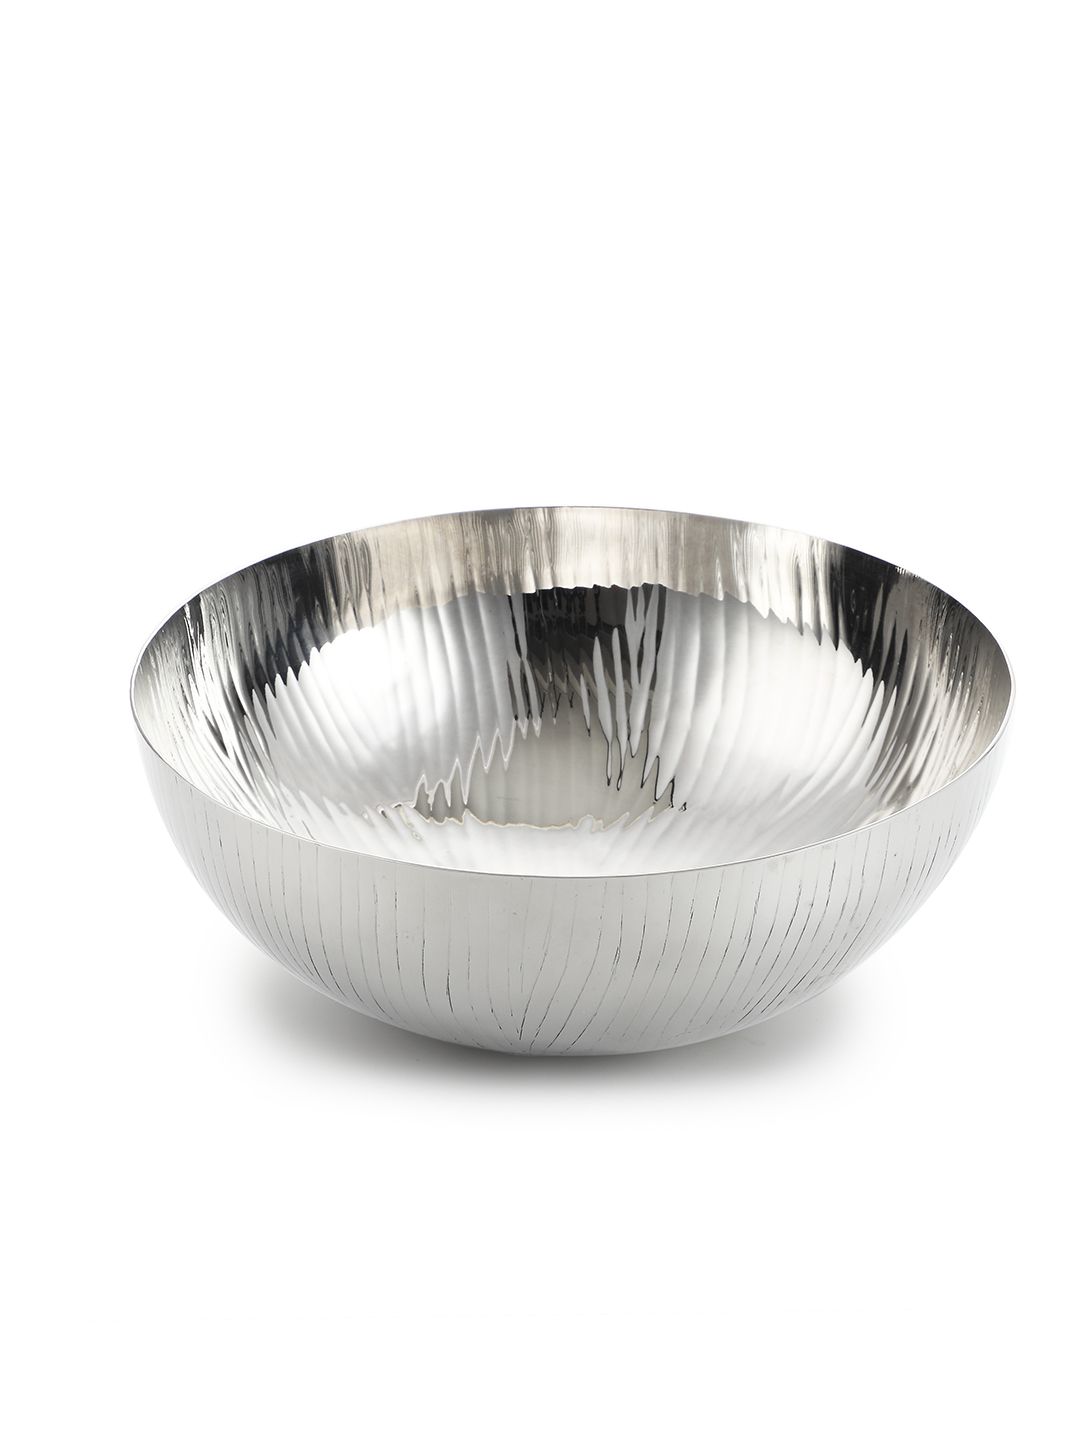 ARTTDINOX Steel 1 Pieces Stainless Steel Glossy Bowls Price in India